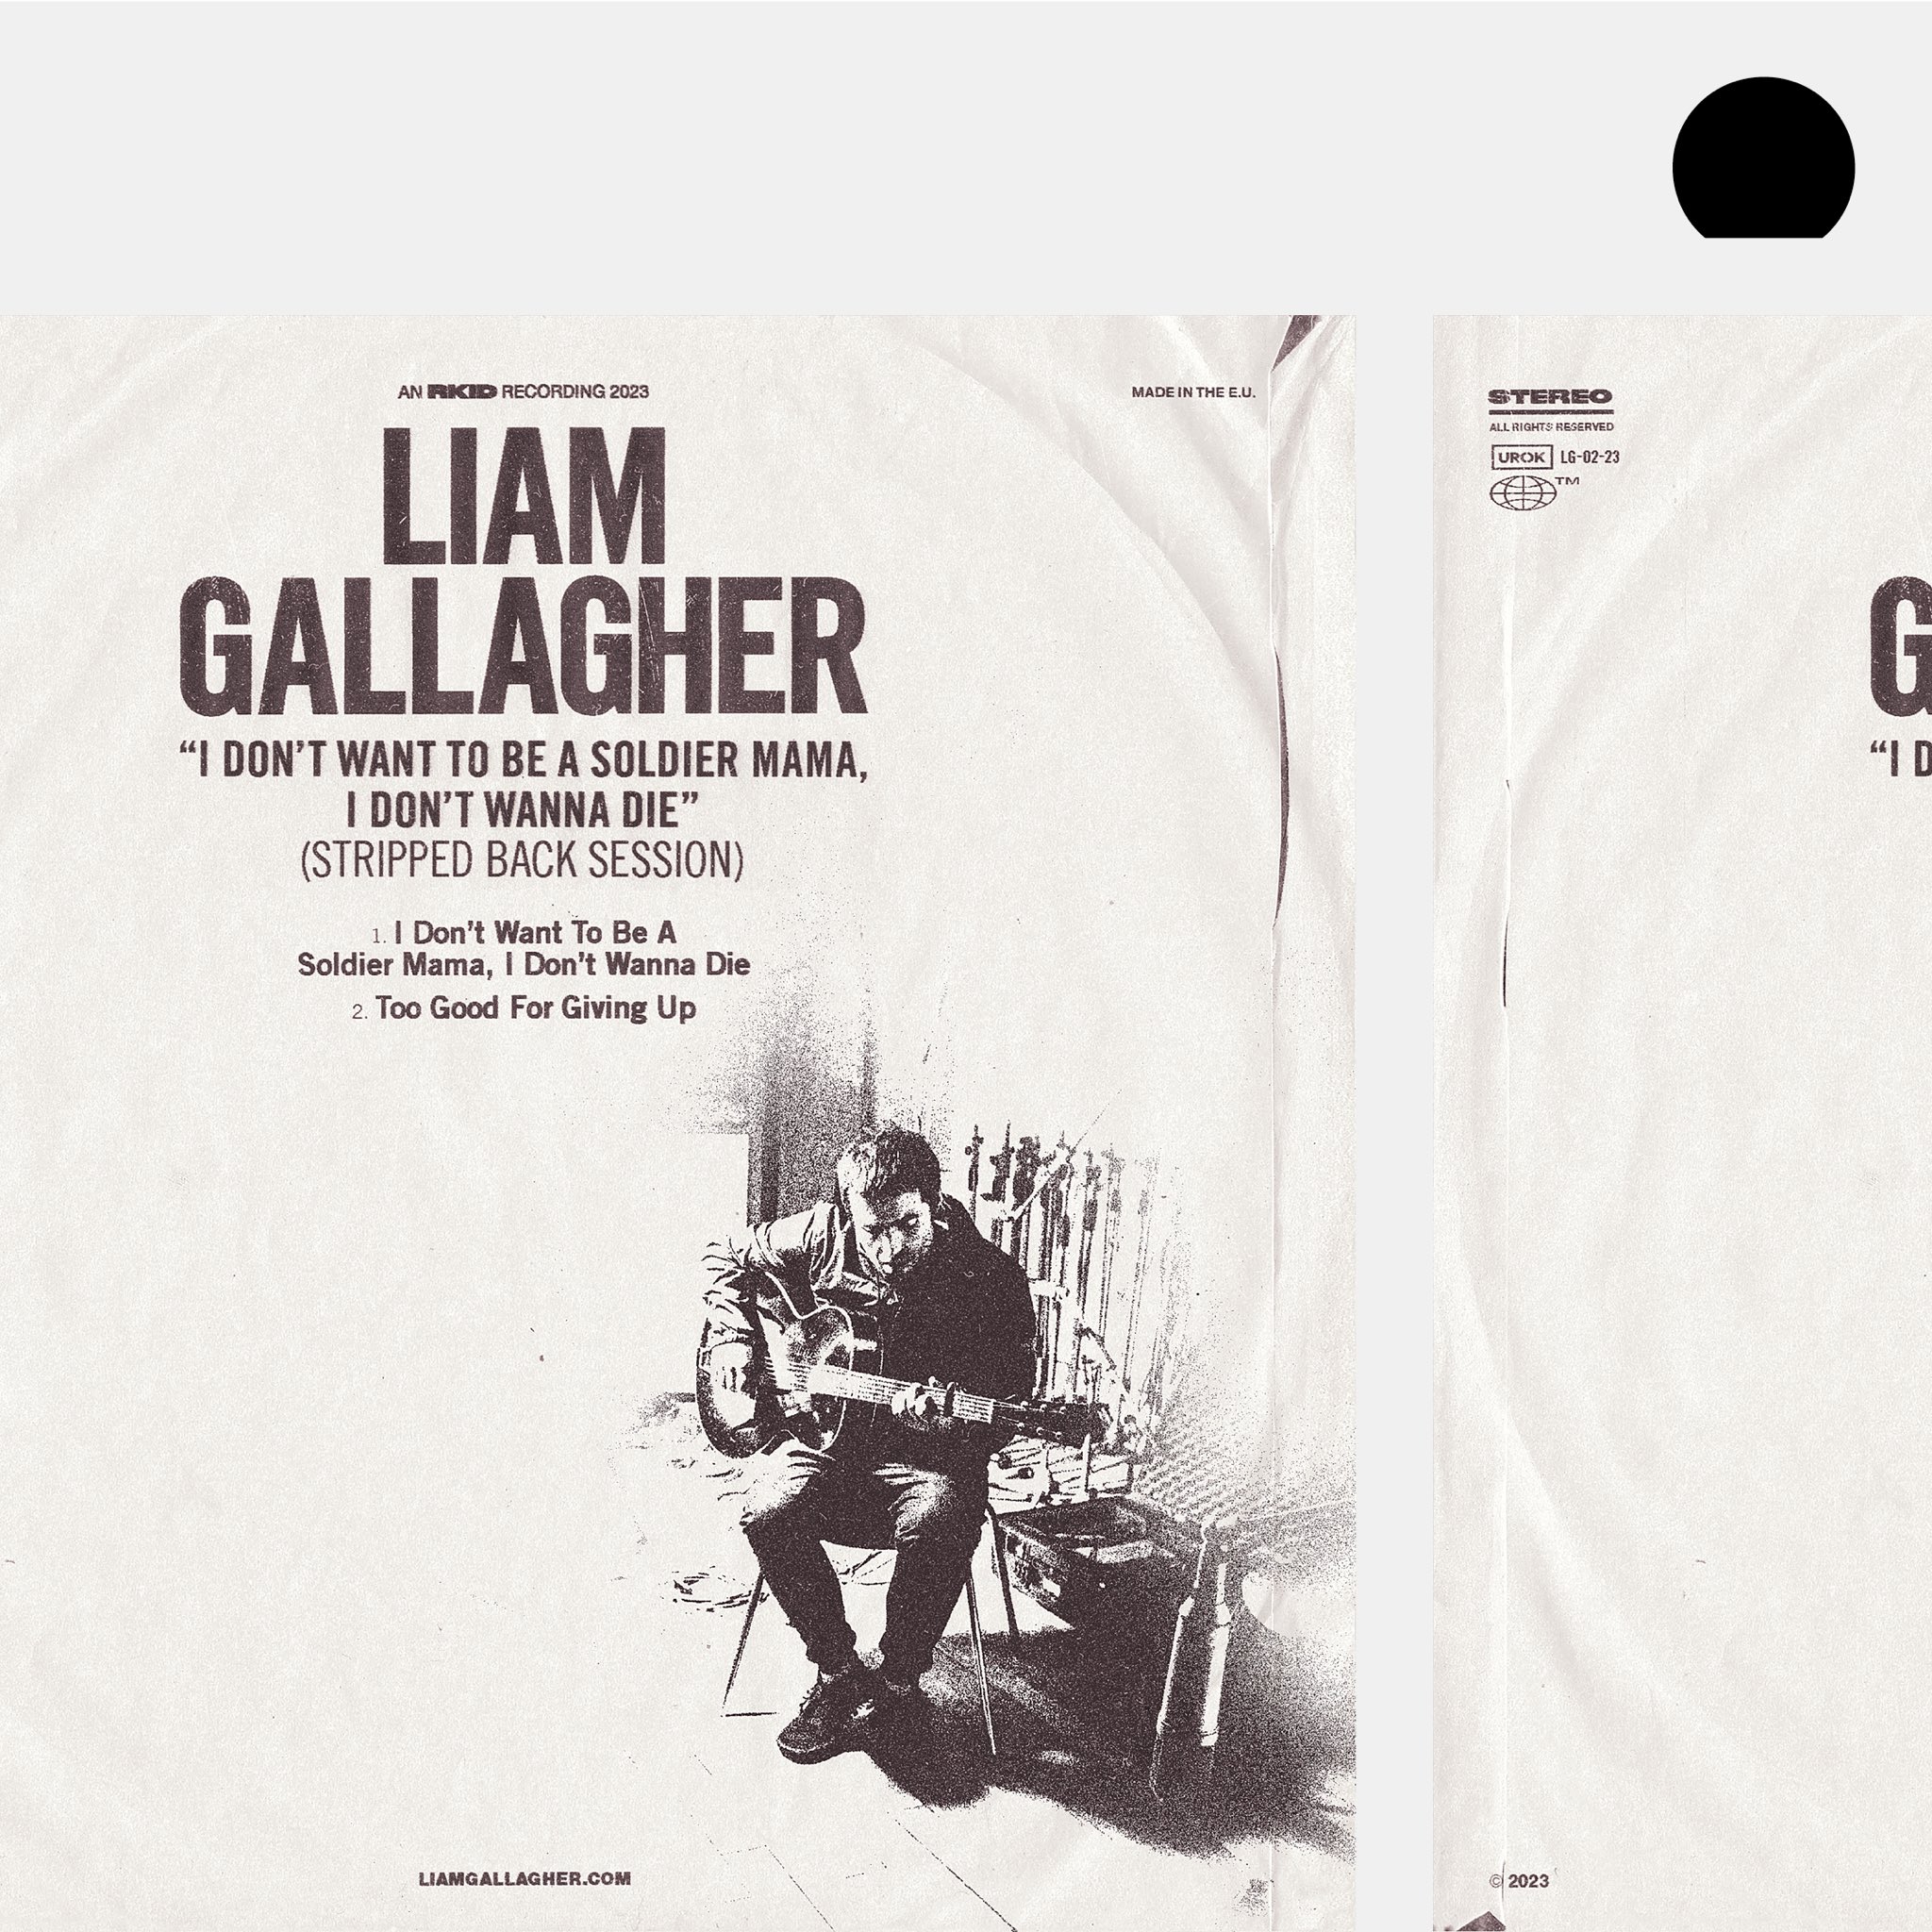 News – Liam Gallagher – I Don’t Want To Be A Soldier Mama, I Don’t Wanna Die (Stripped Back Session)